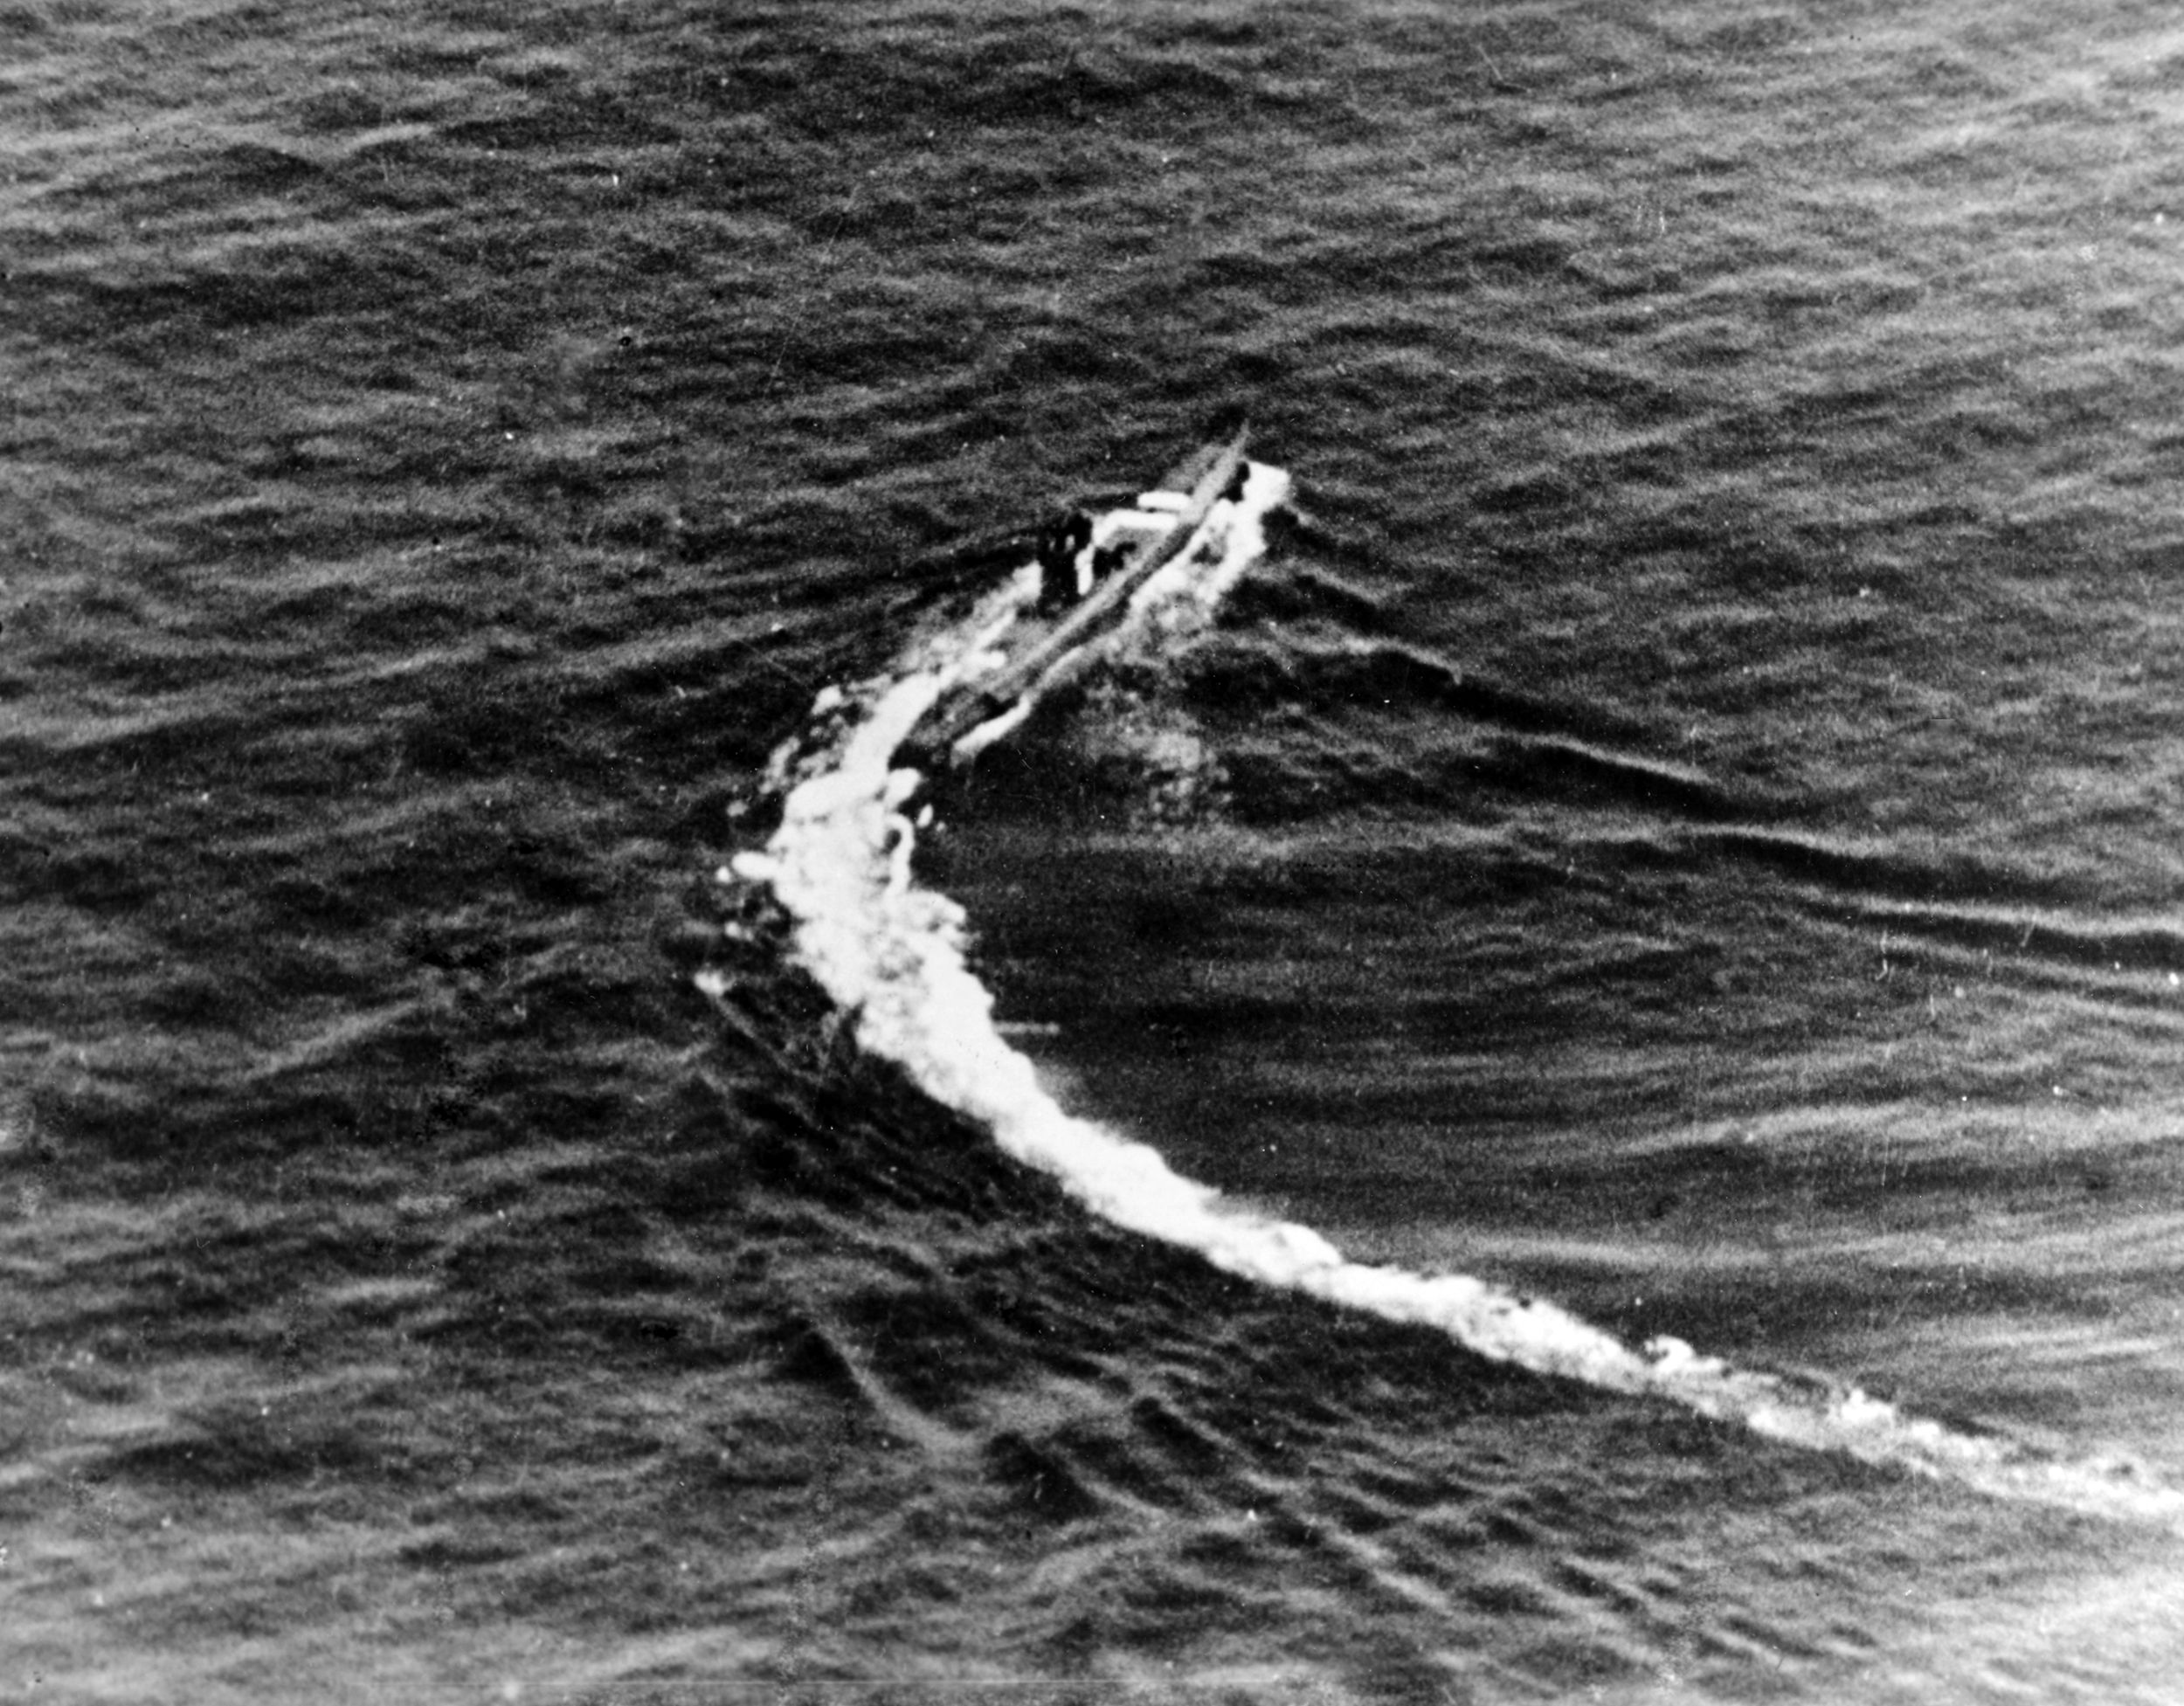 Photographed from an American aircraft preparing to attack, a Japanese submarine is maneuvering at high speed in this image taken in March 1943.